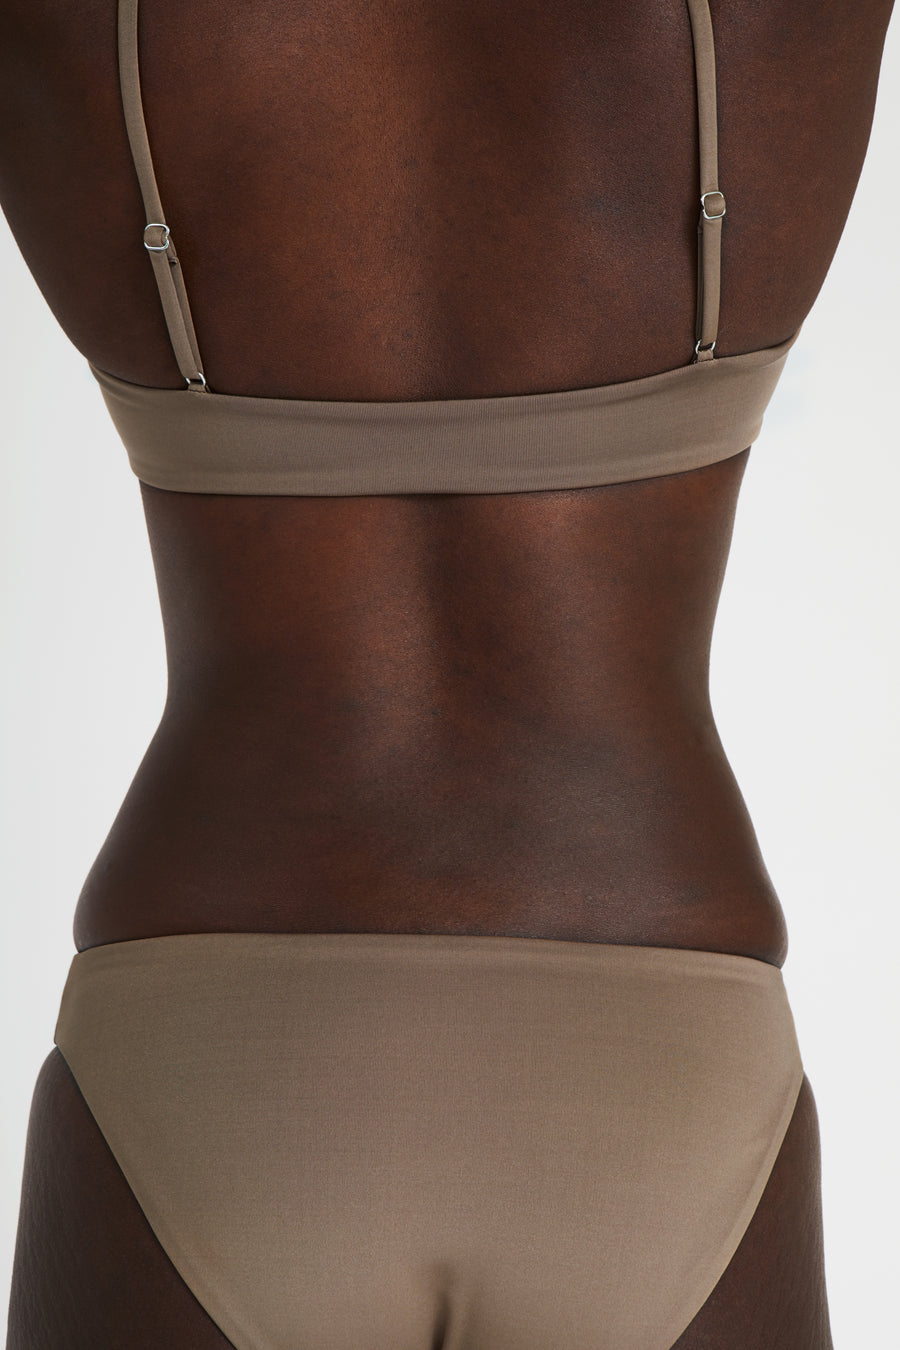 TOP – oval, brown